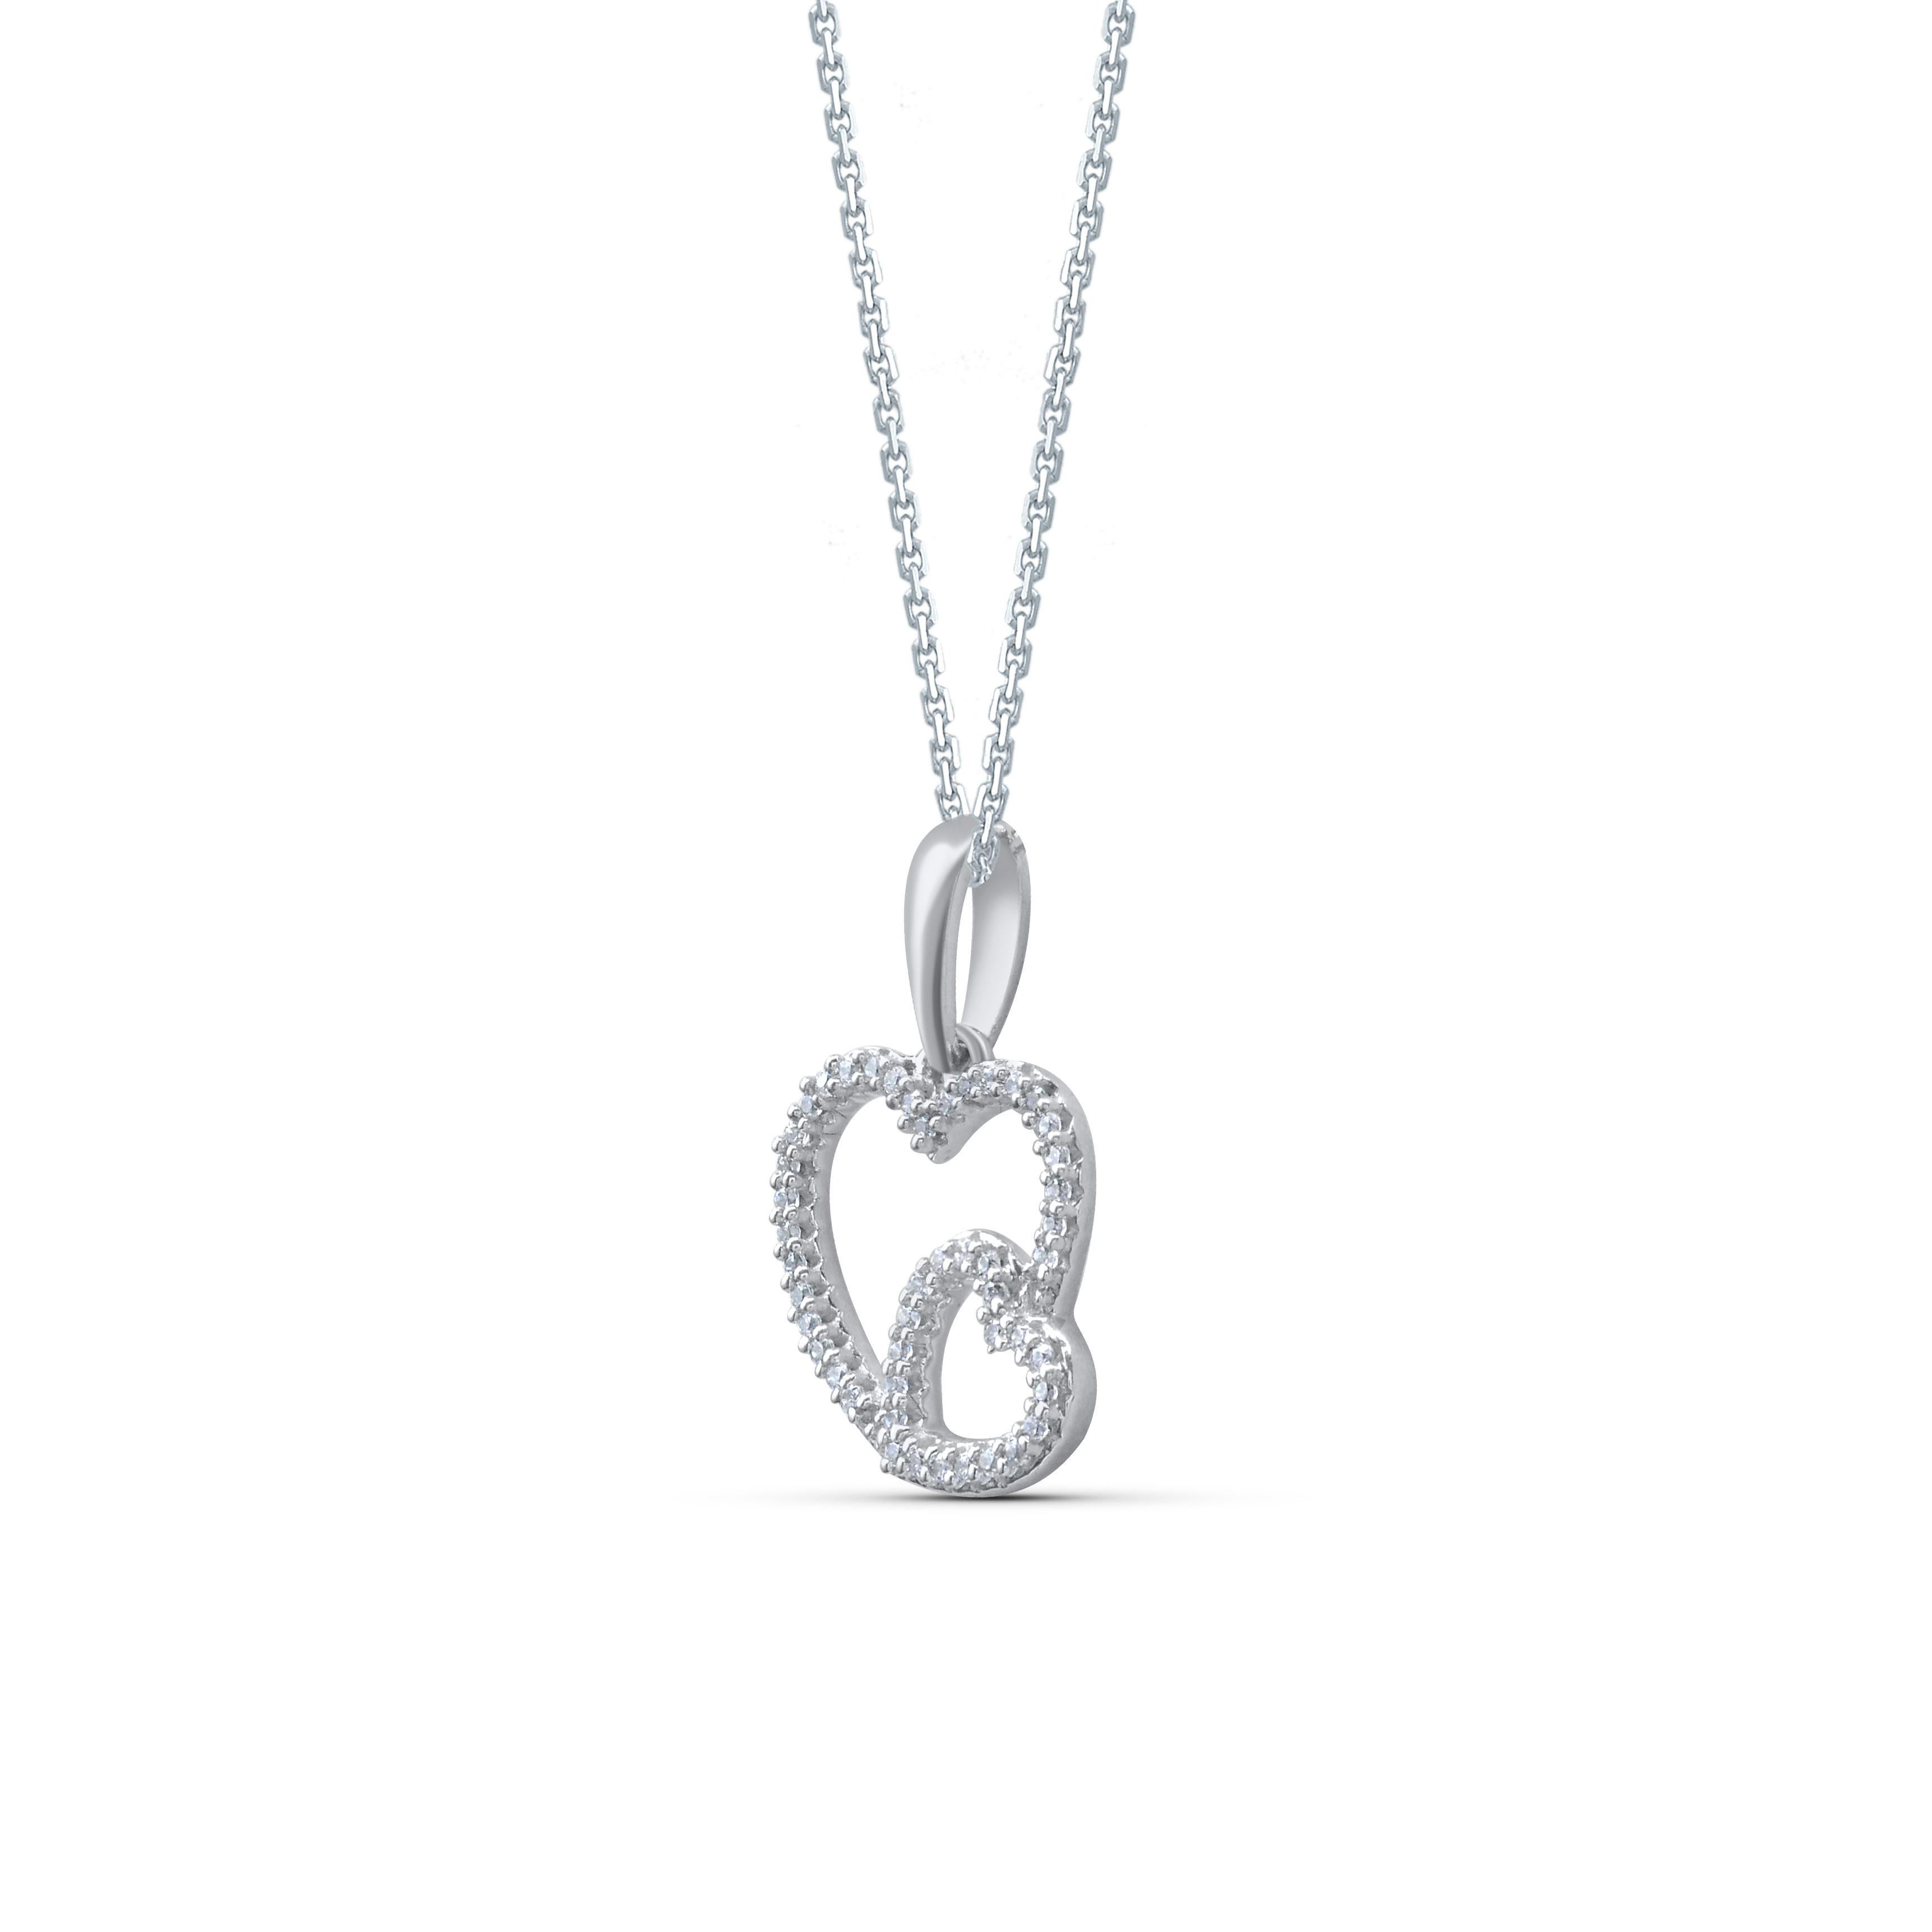 Bring charm to your look with this diamond heart pendant. The pendant is crafted from 14 karat white gold and features 47 round single cut diamond set in prong set and a high polish finish complete the brilliant sophistication of this head-turning